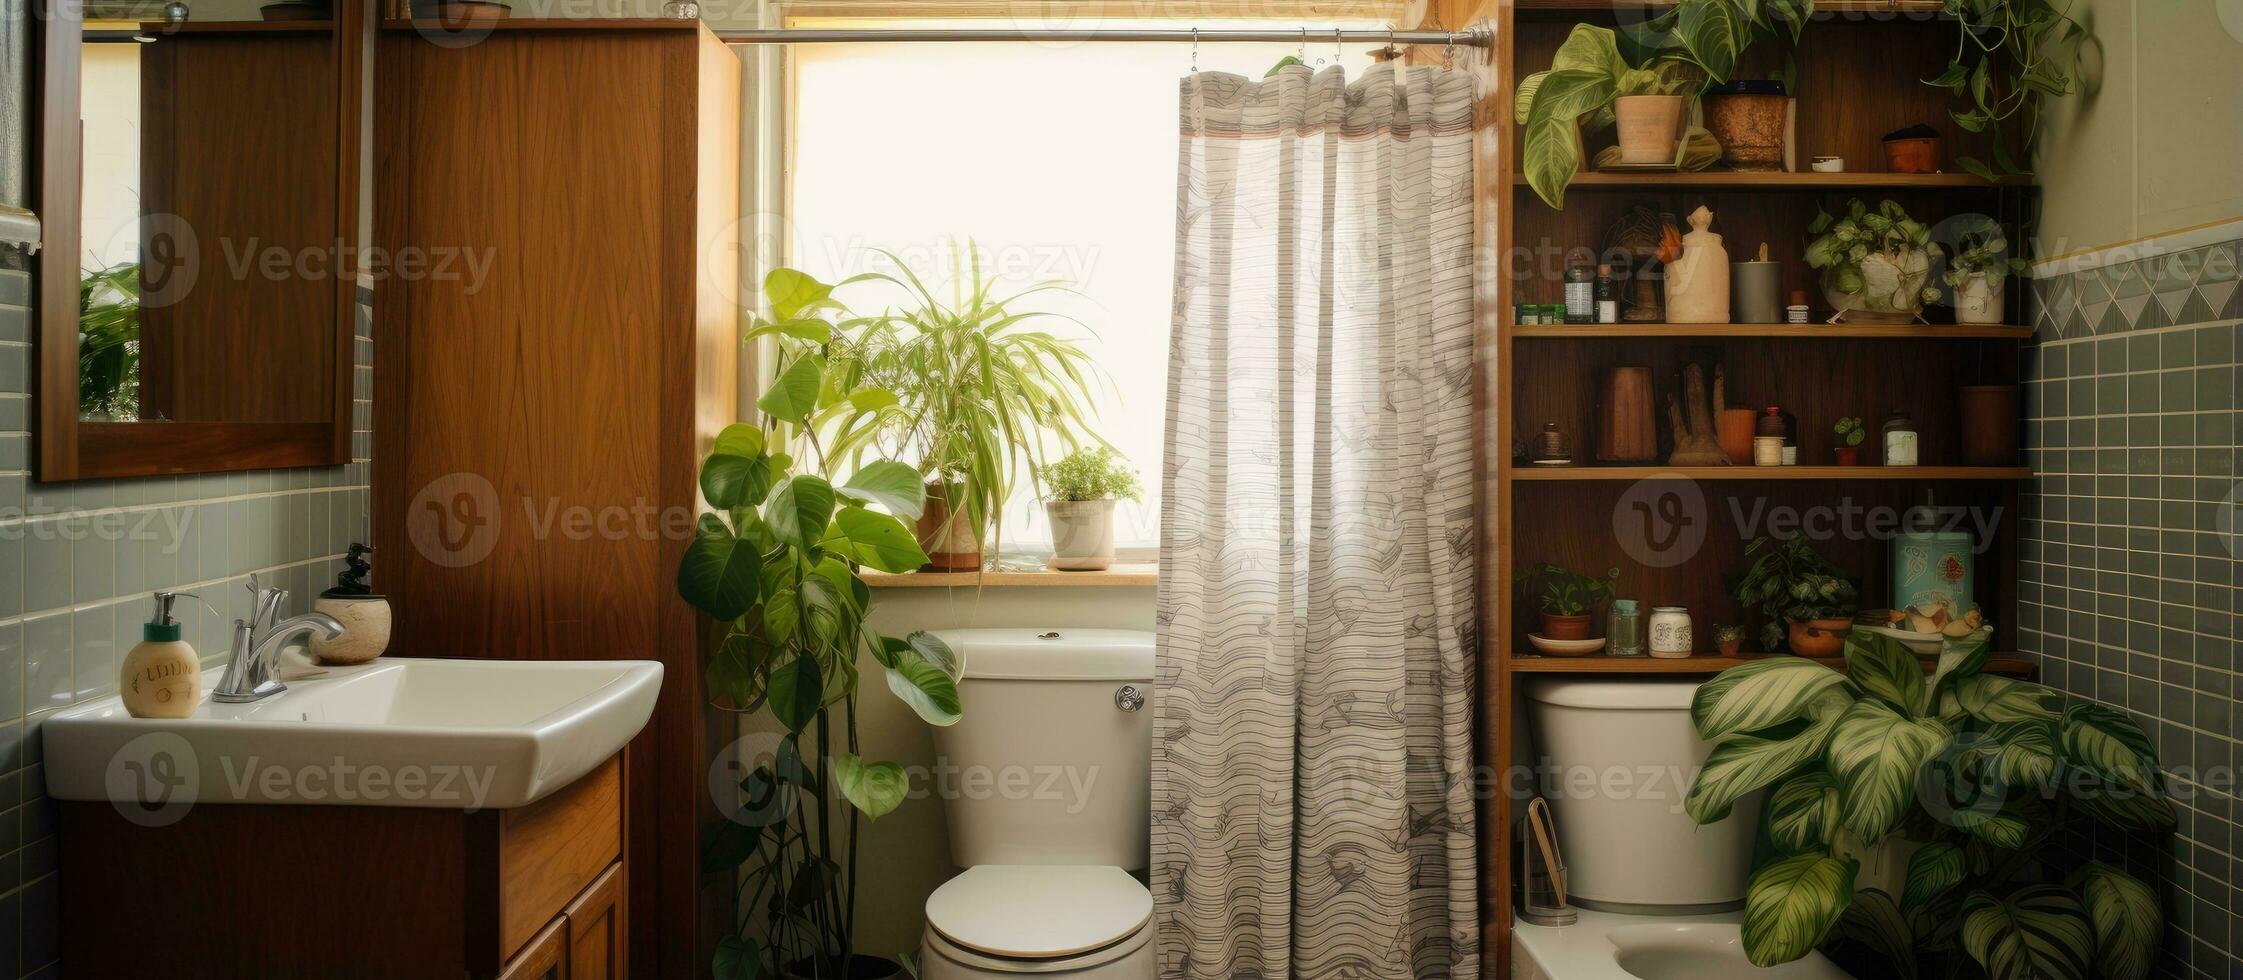 Compact bathroom featuring a wooden vanity sink patterned shower curtain toilet in the center and three hanging plants on the railing below photo